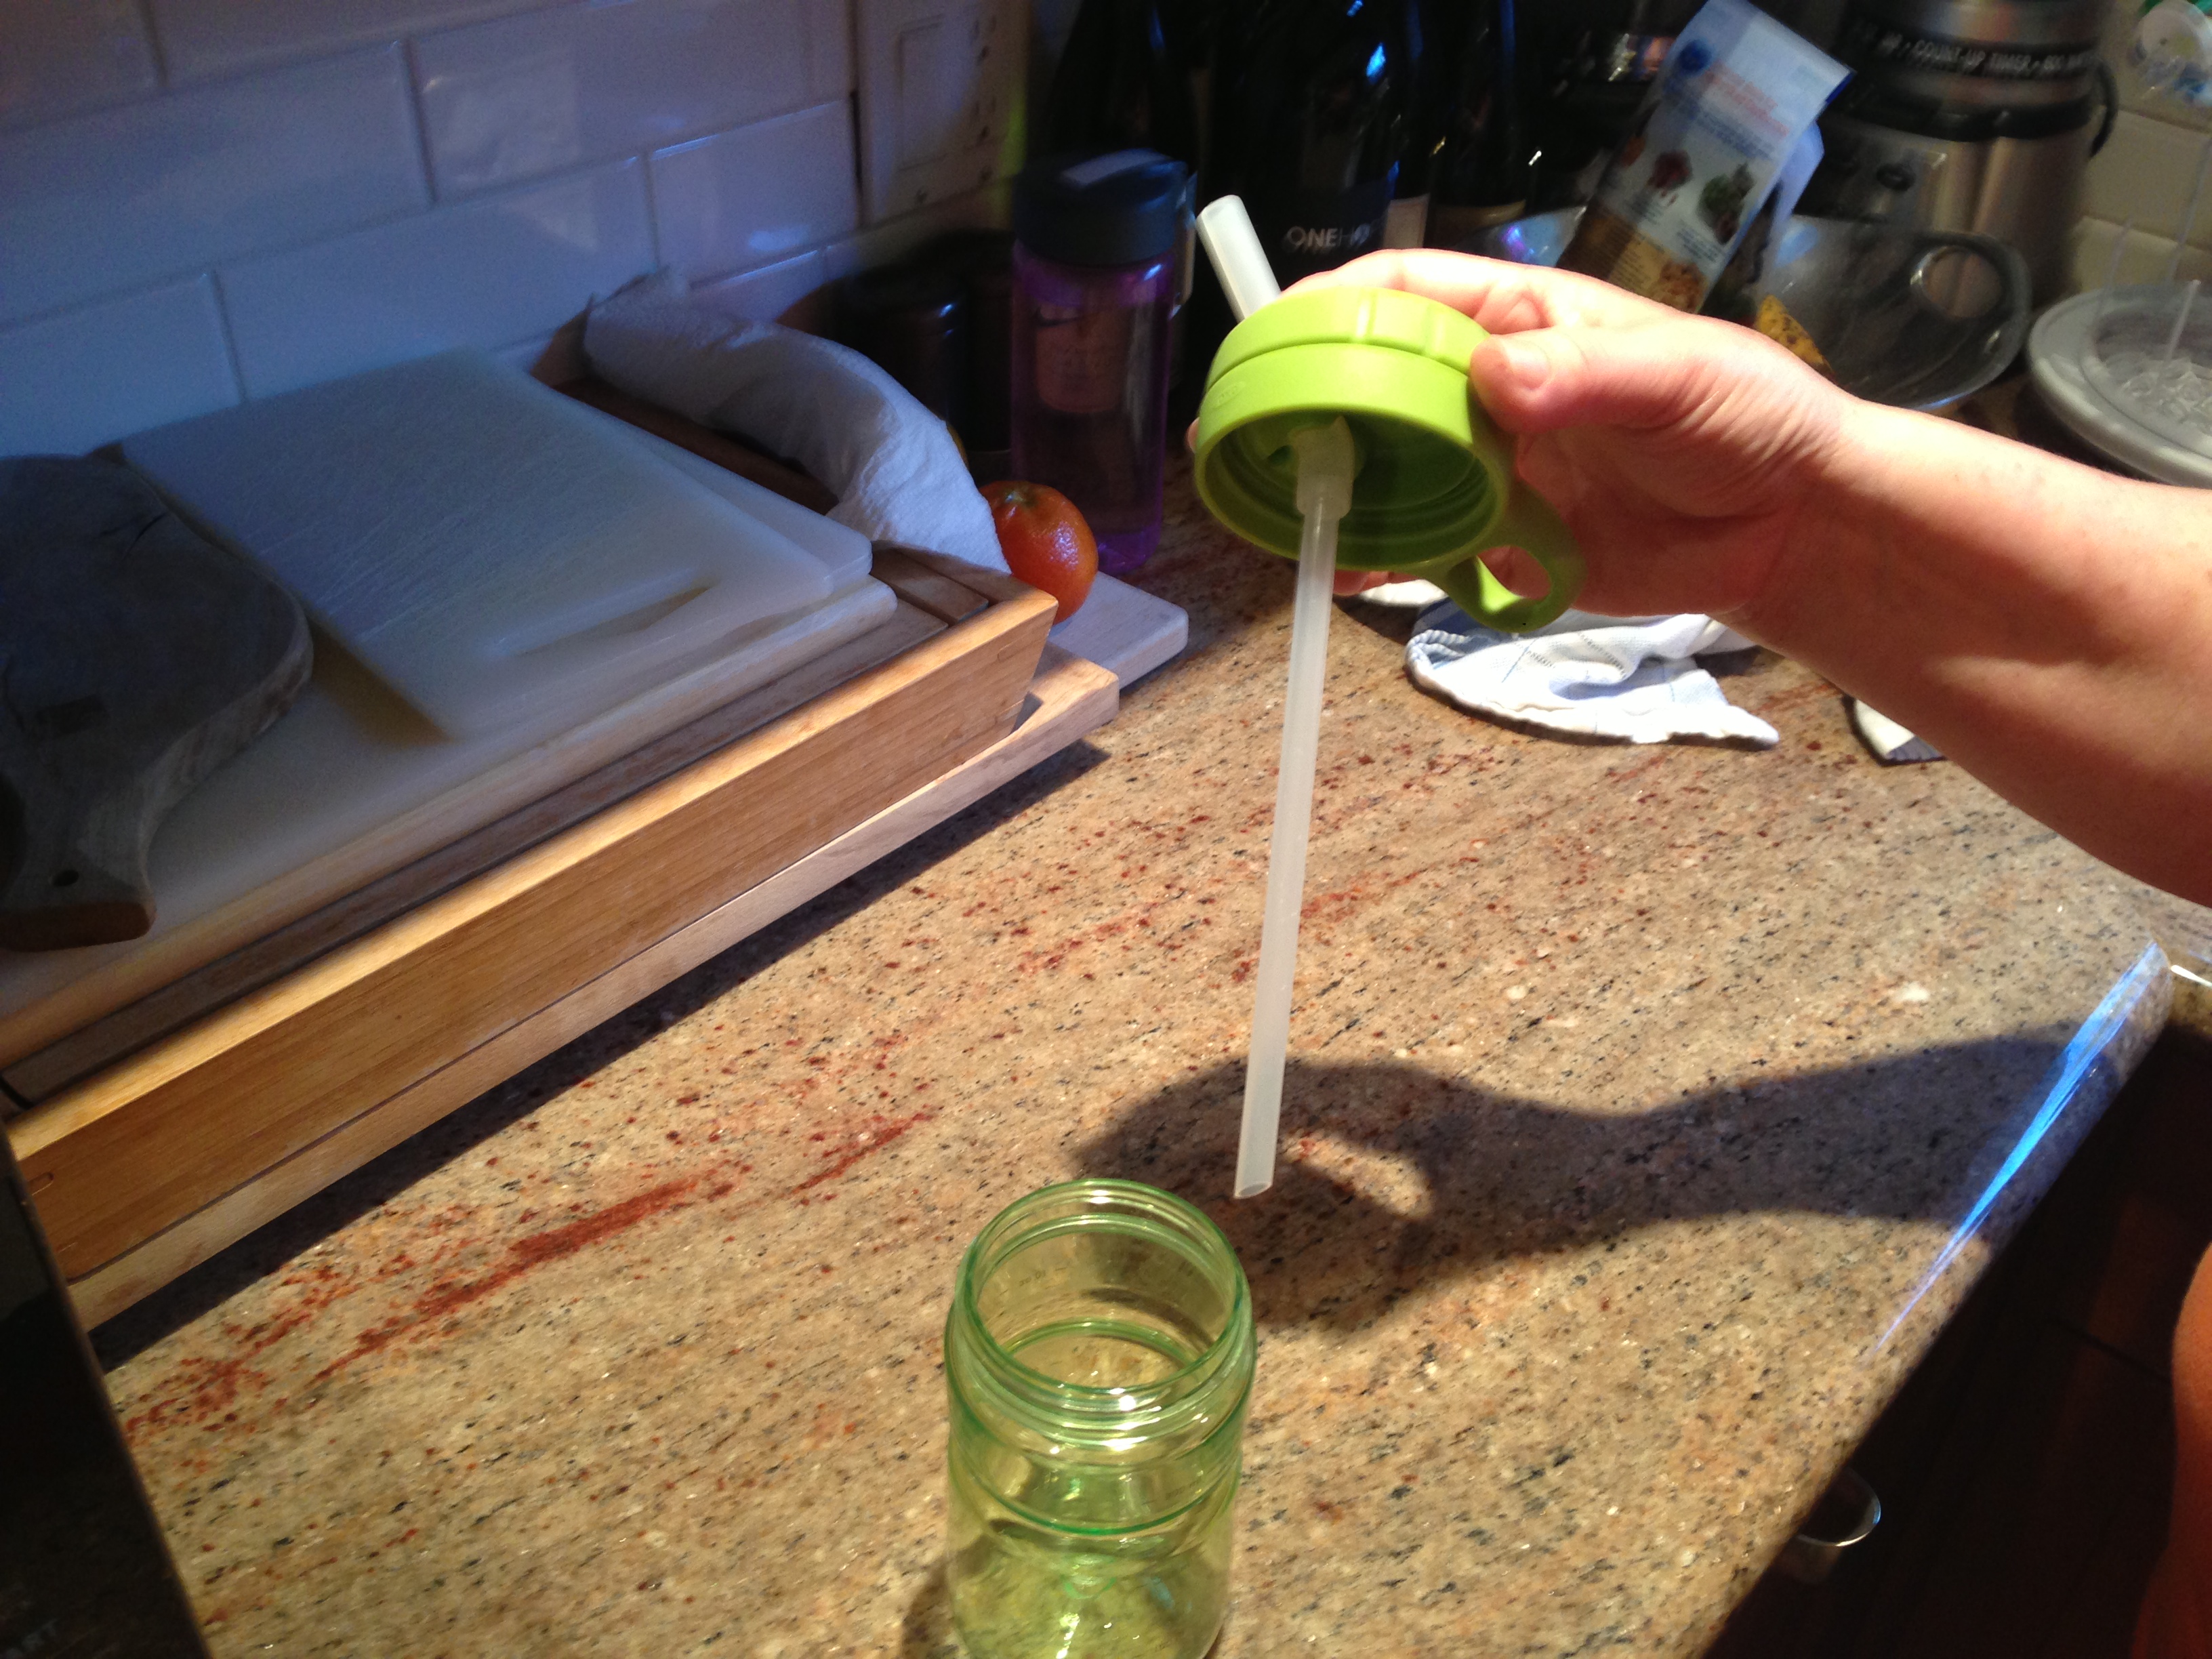 Today's Hint: A DIY Fix For Lost or Broken Sippy Cup Straws – Hint